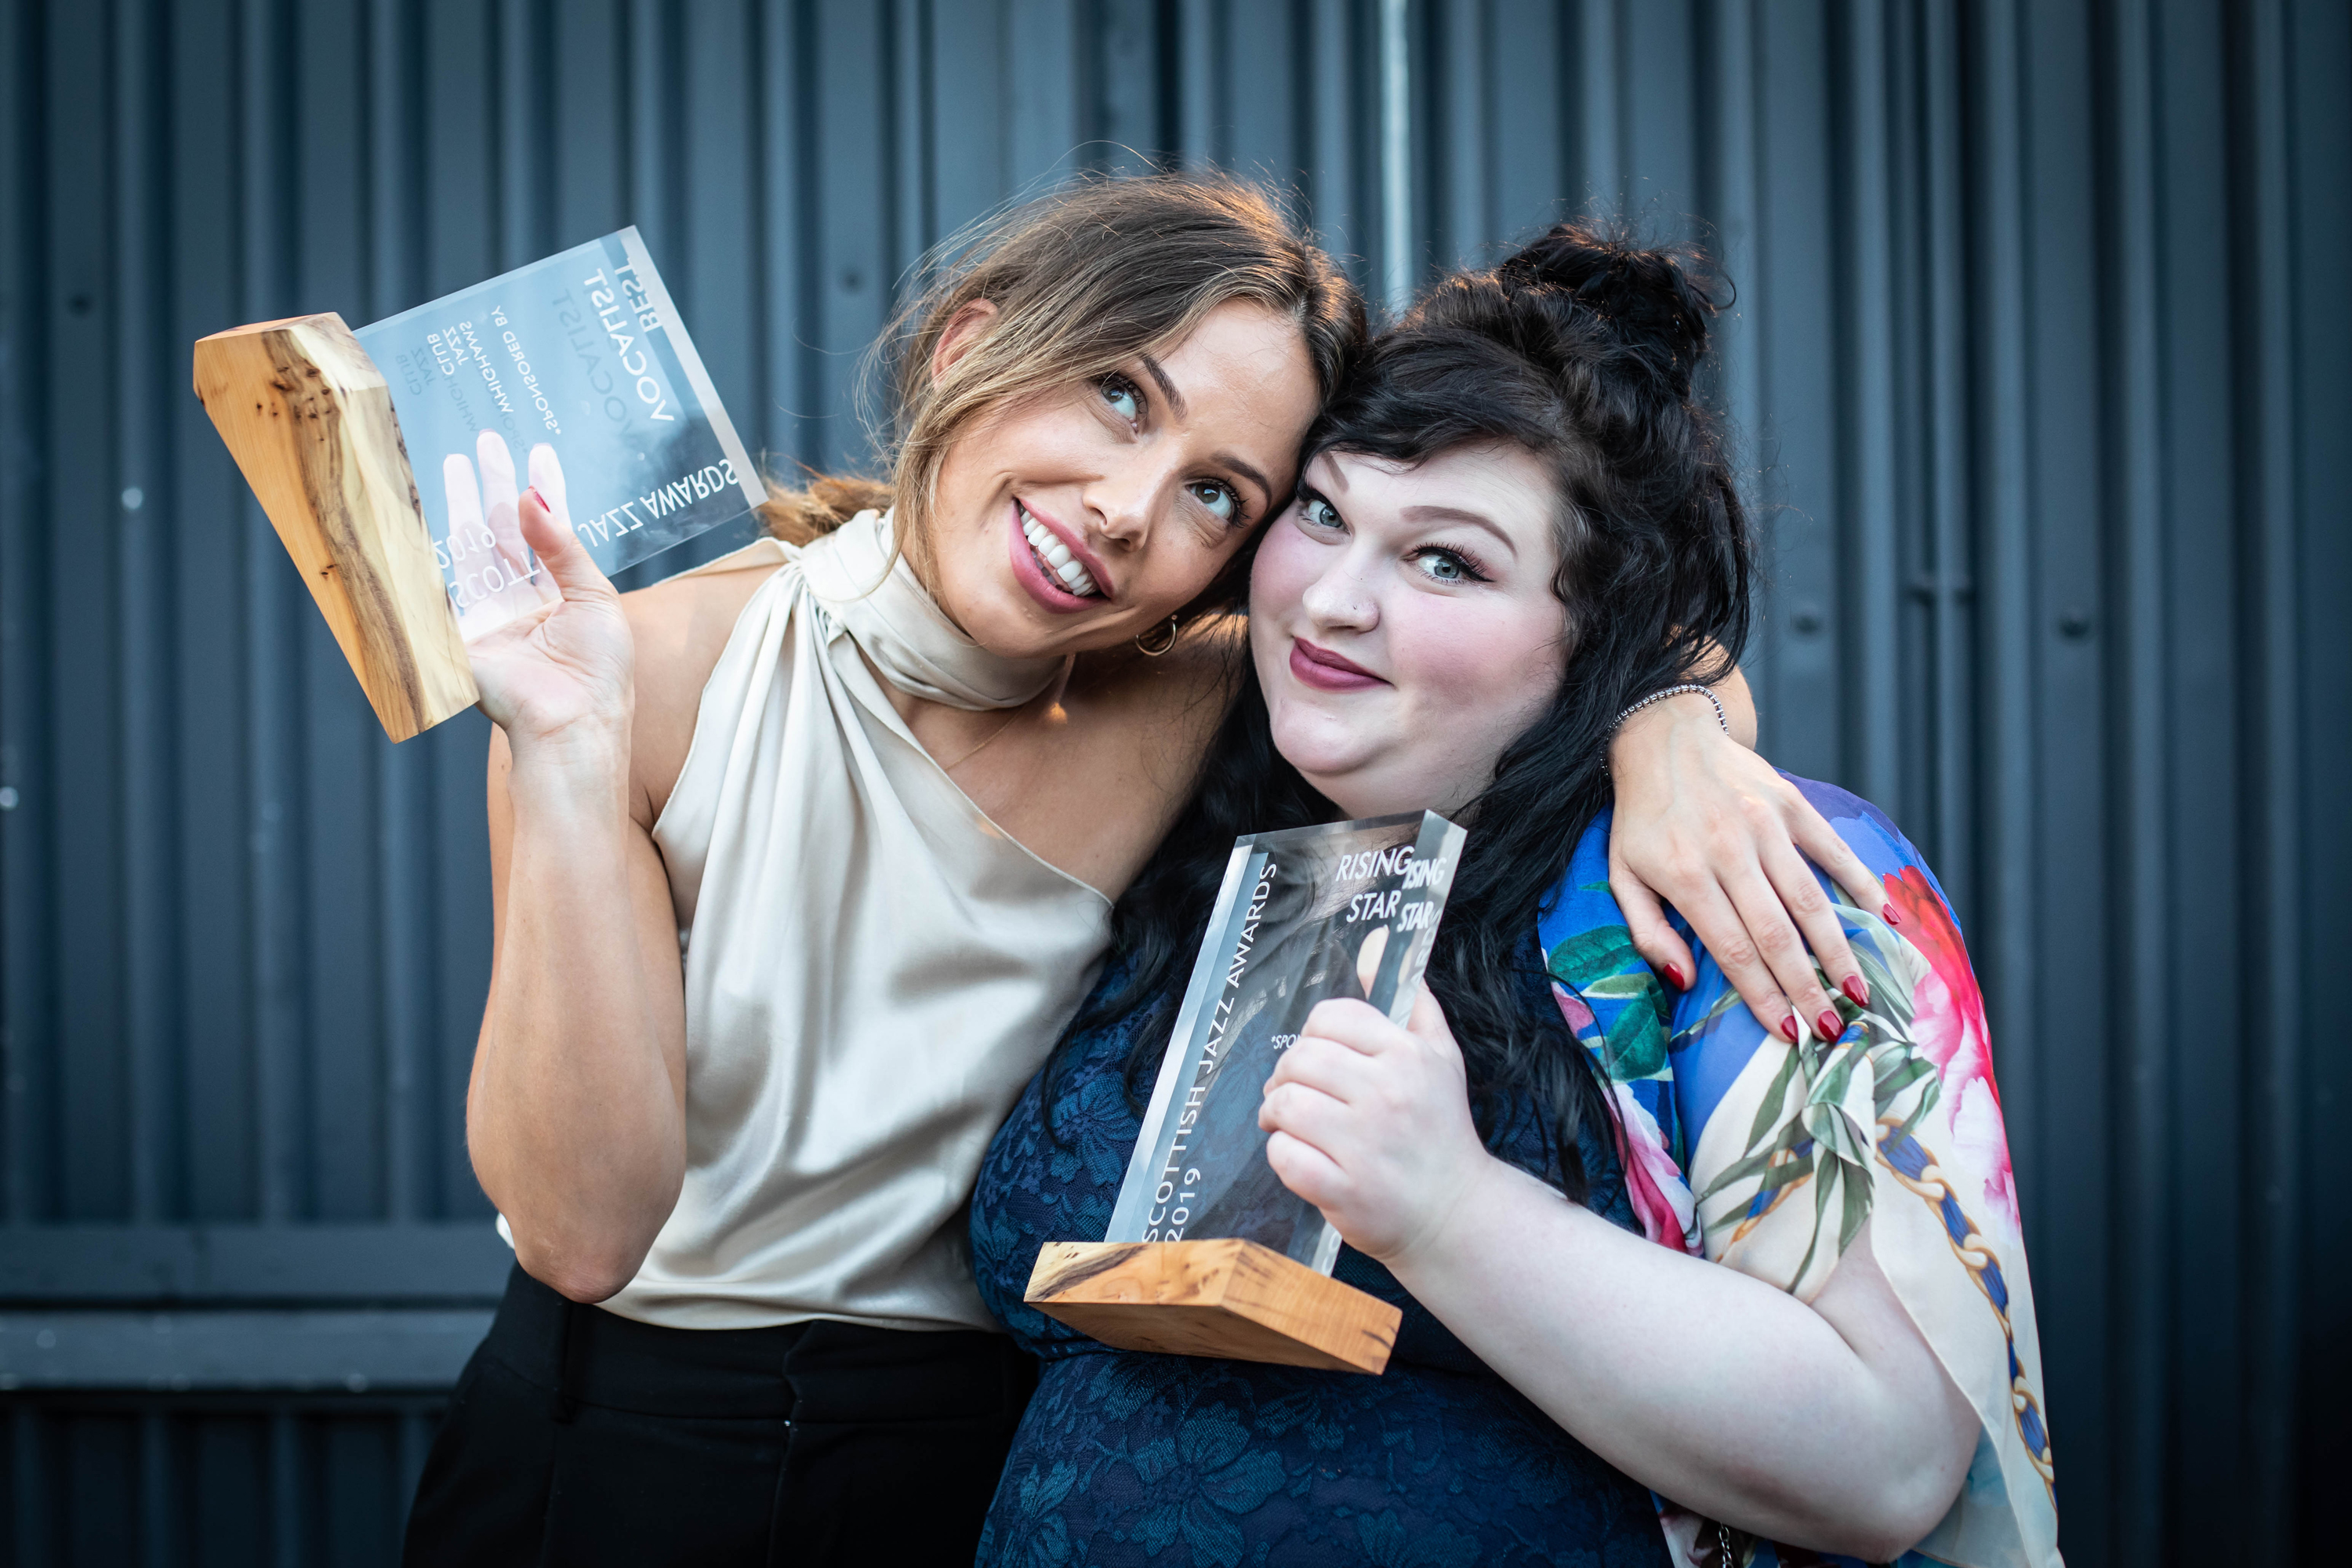 Georgia Cécile winner with her Best Vocalist Award and Marianne McGregor, winner of Rising Star Award